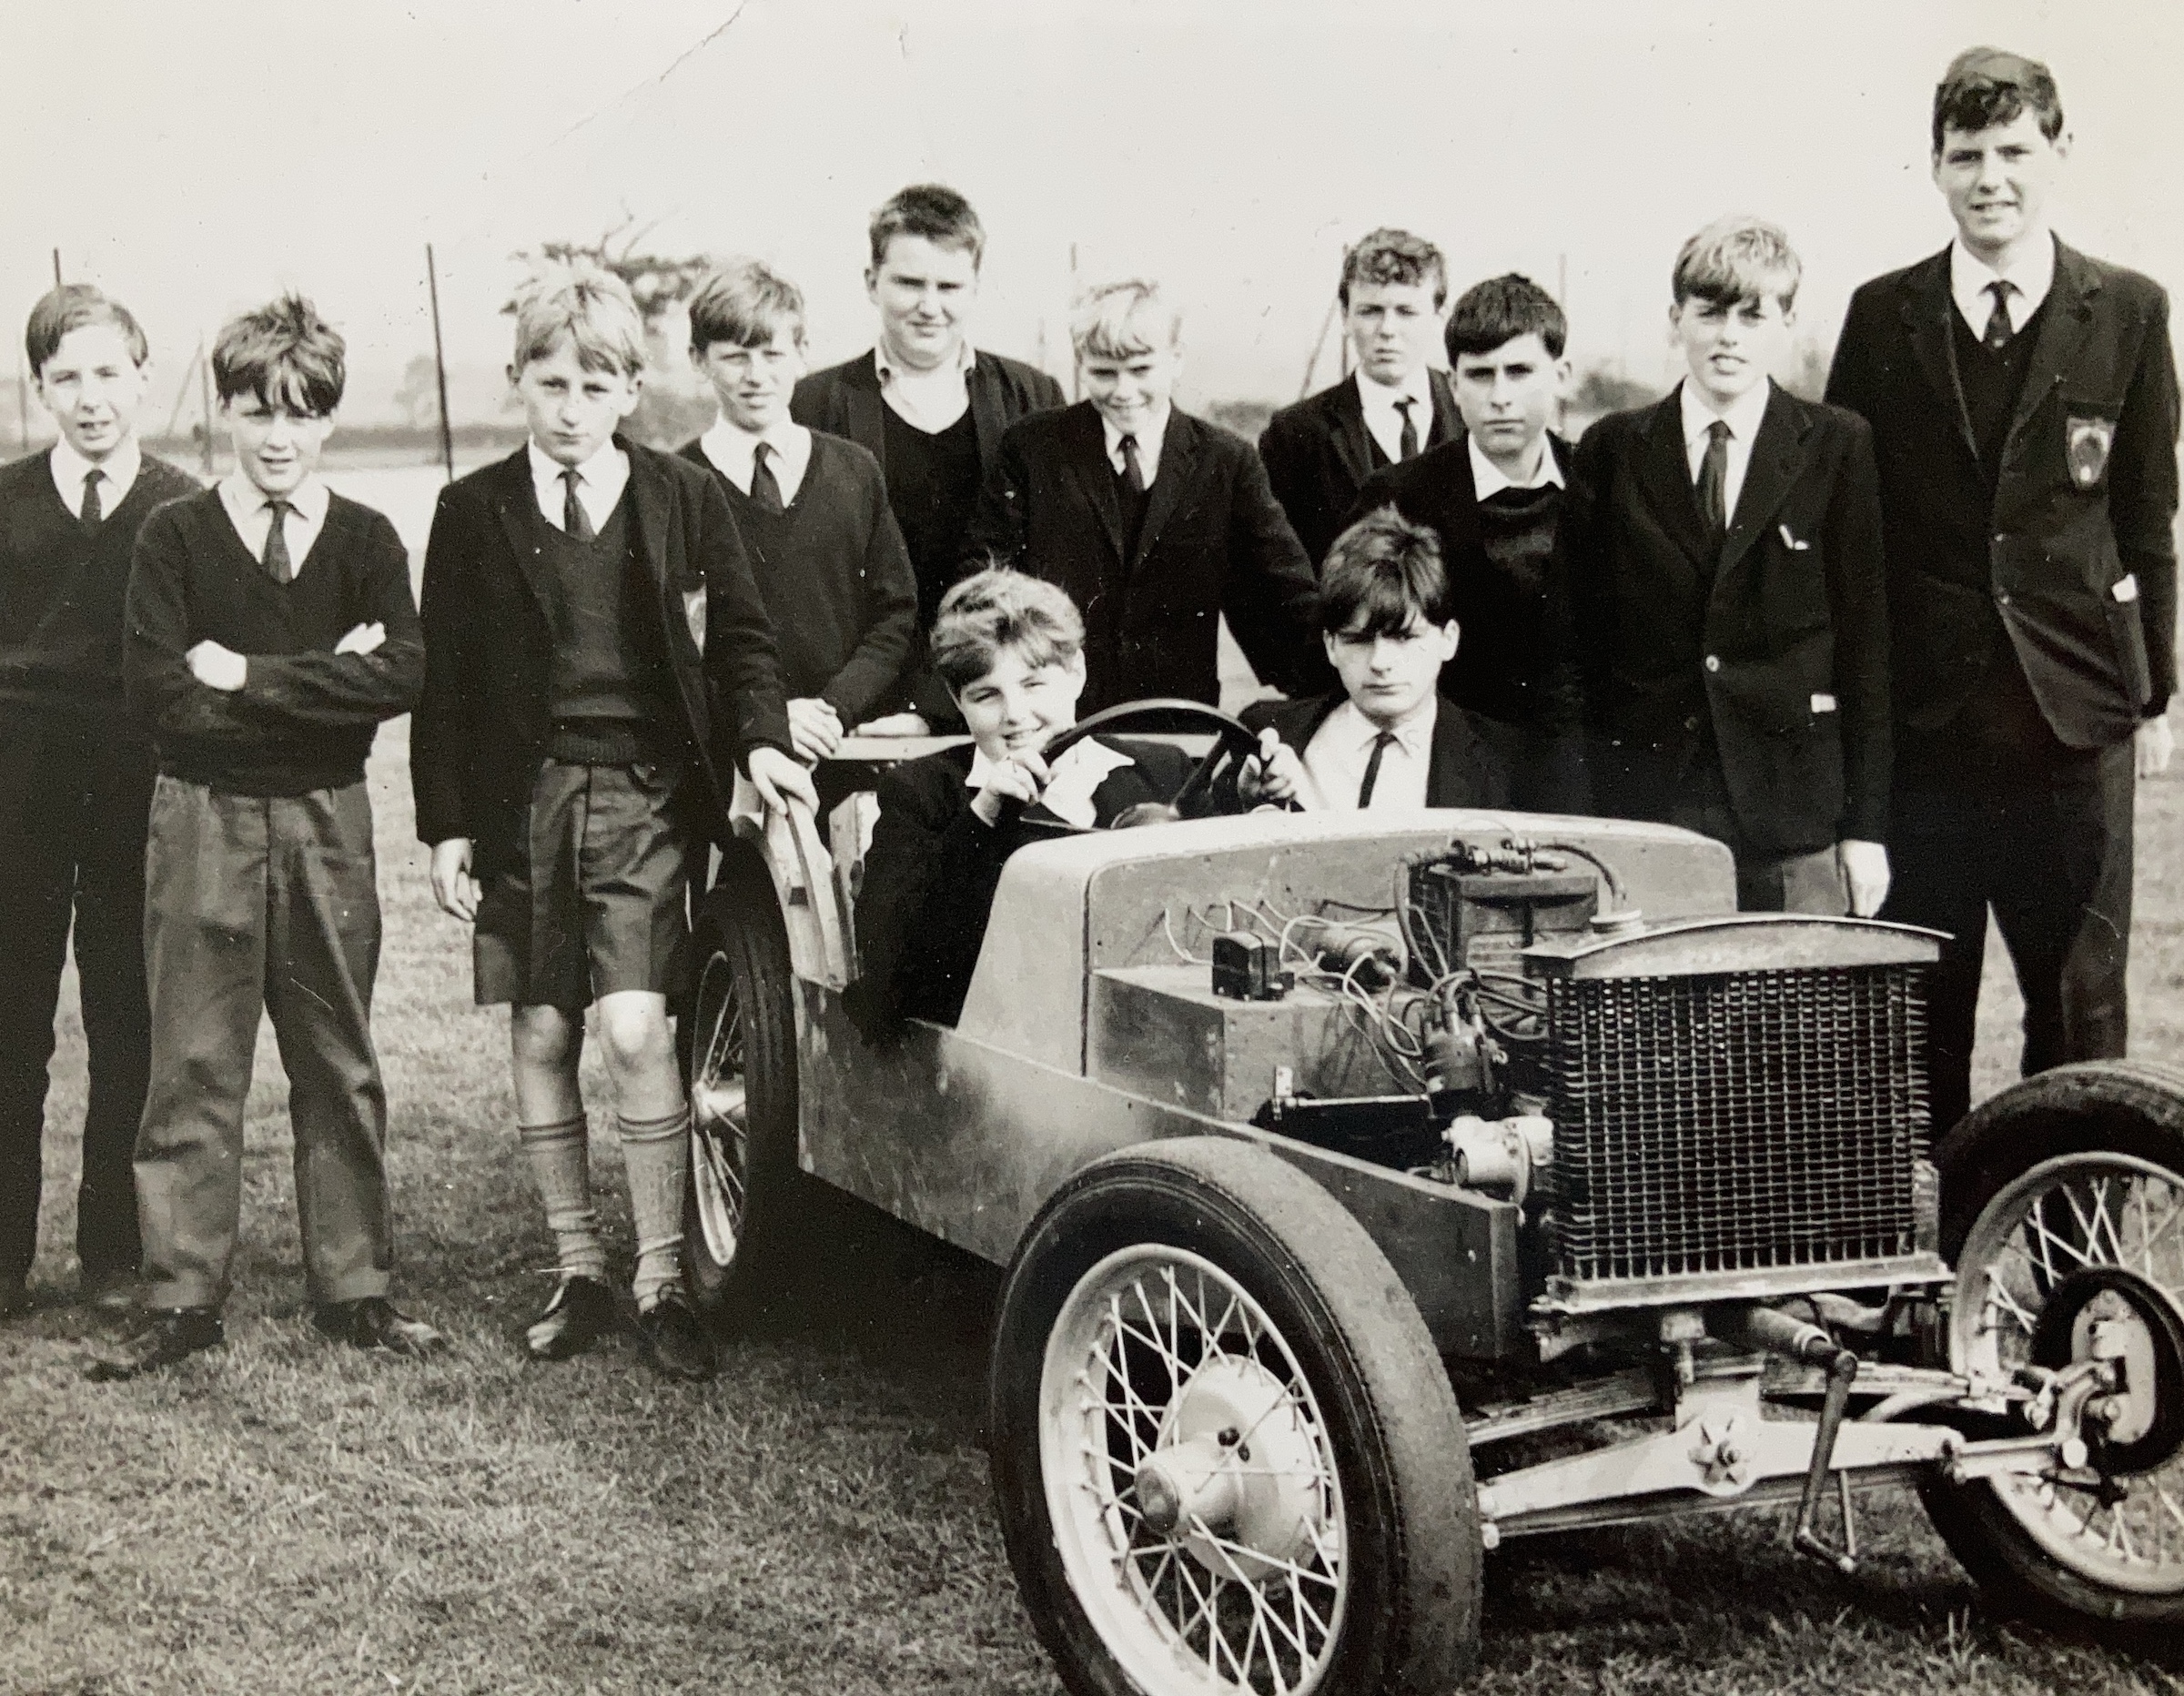 Did you build this car at school in the 1960s?